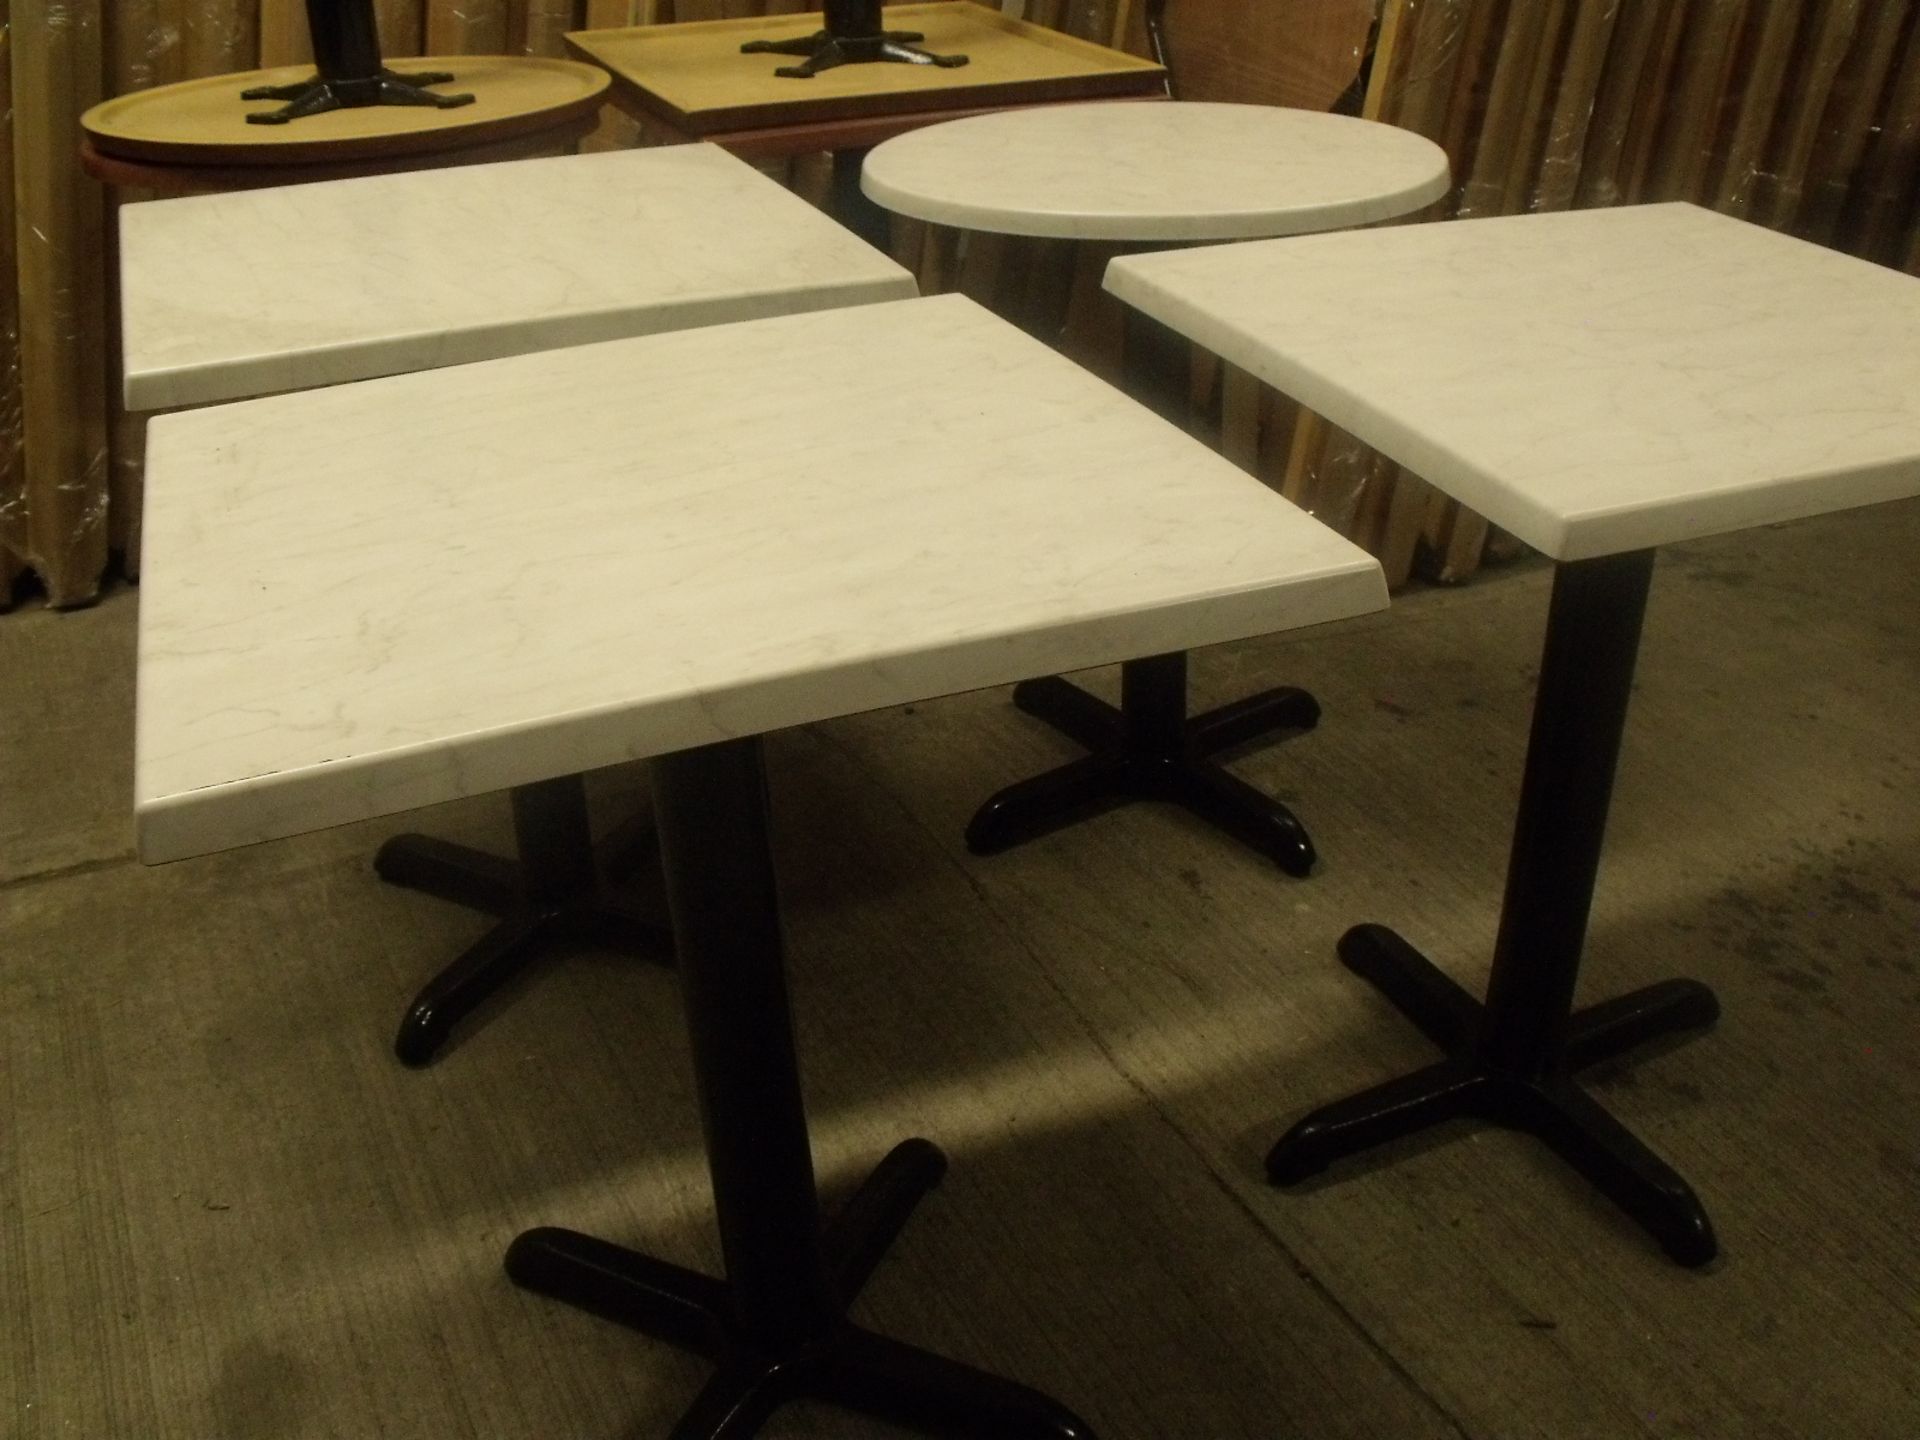 4 x bistro / café tables werzalit tops white marble 1x 600mm round and 3 x 600mm square with black